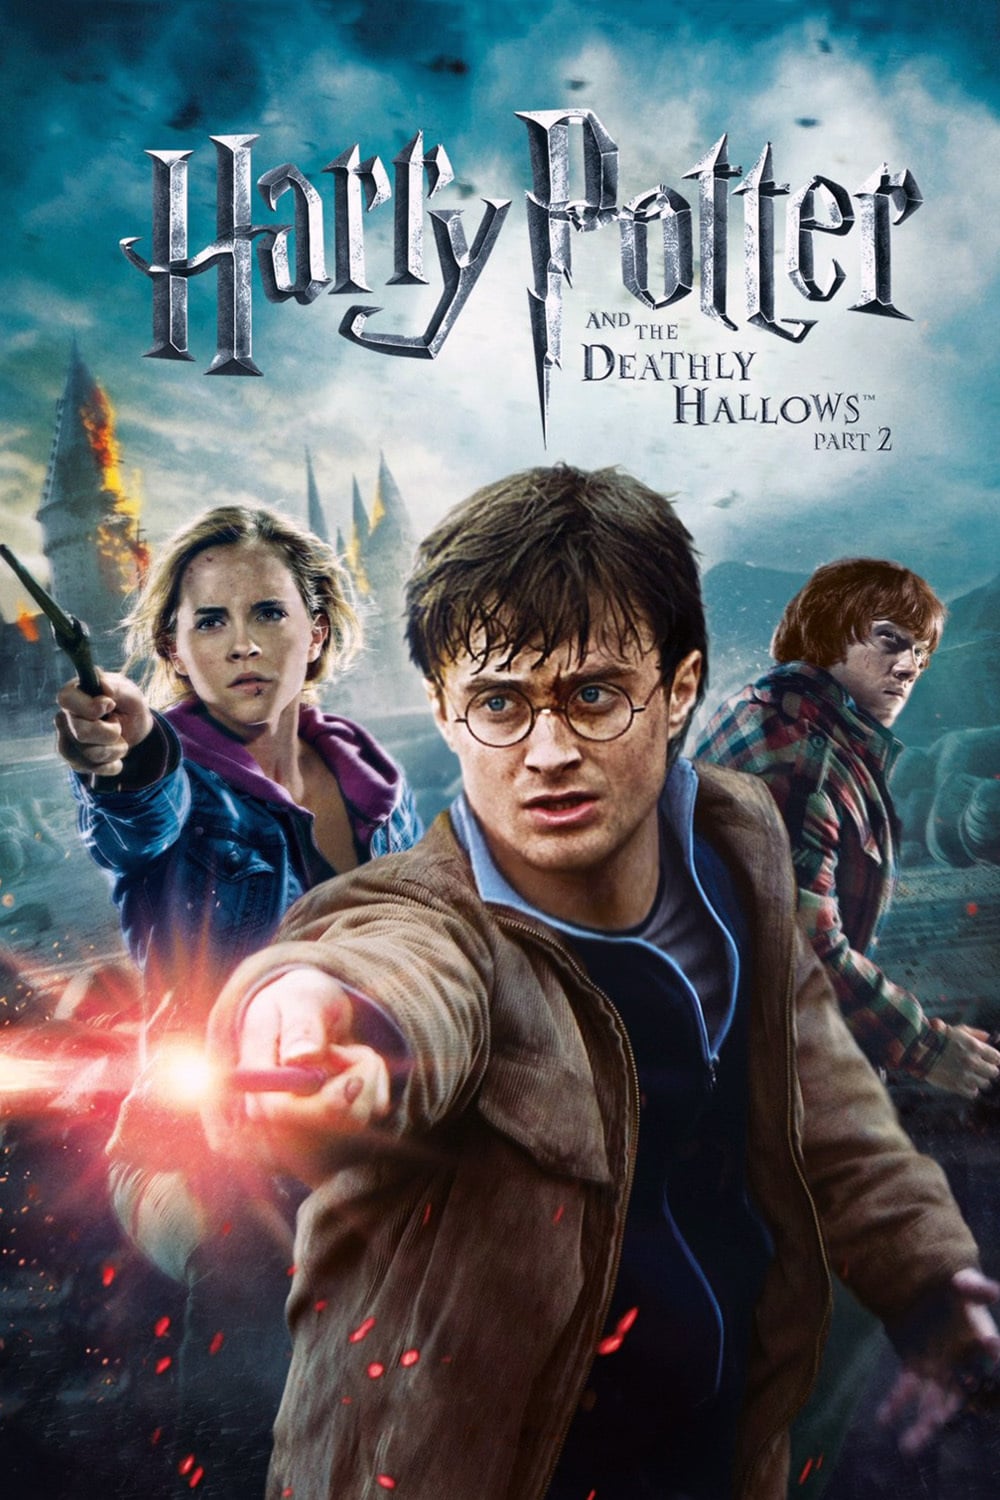 Harry potter 2 movies download in hindi